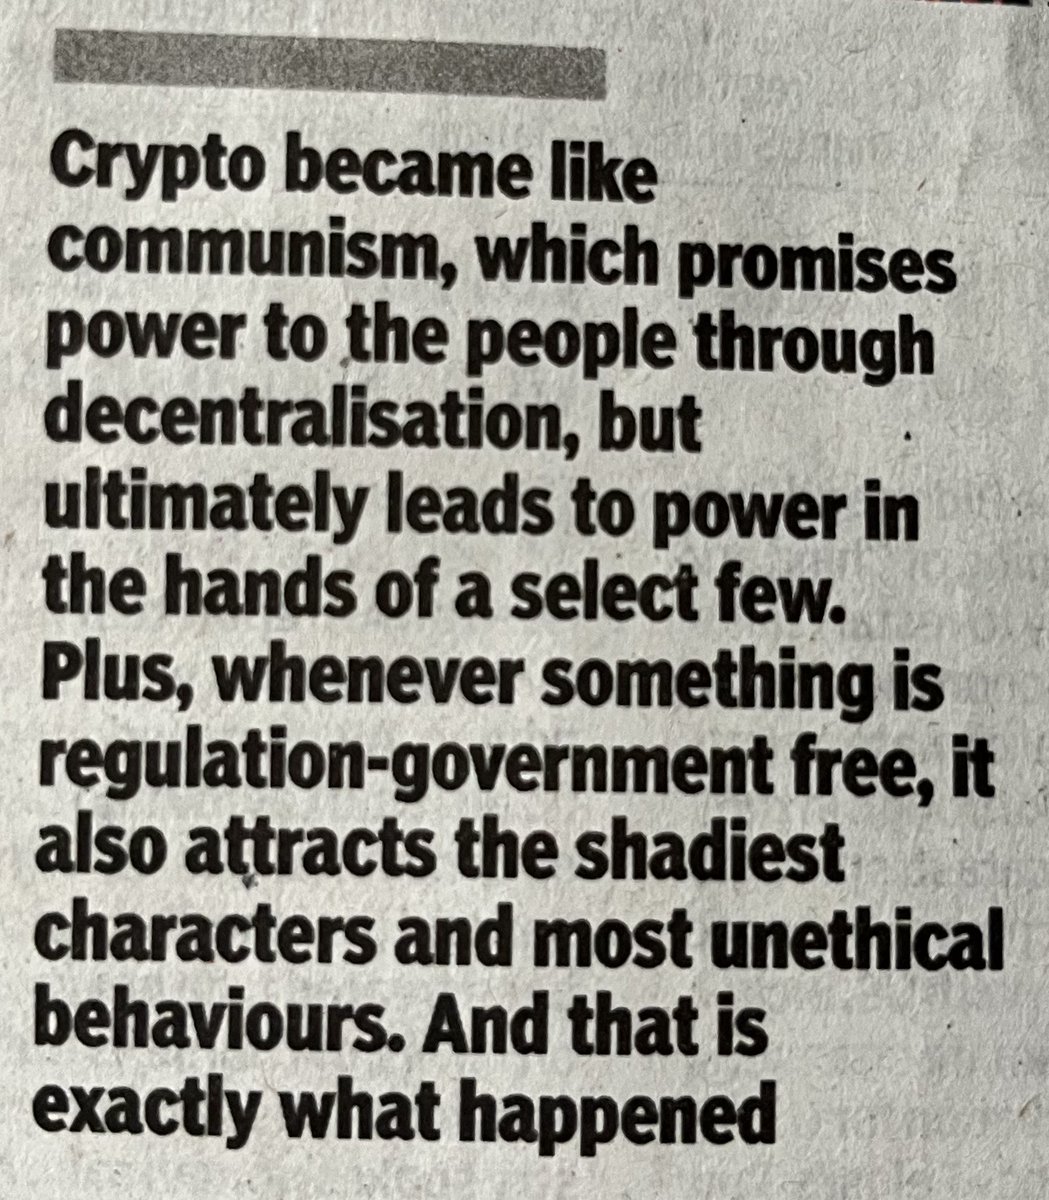 Crypto is dead!! Sorry! @chetan_bhagat we #Agreeto disagree.  crypto is #notdead. While we agree selected few may have the power to manipulate but not all. Let’s not undermine The power of ##Decentralization and #blockchaintechnology #CryptoIsNotDead